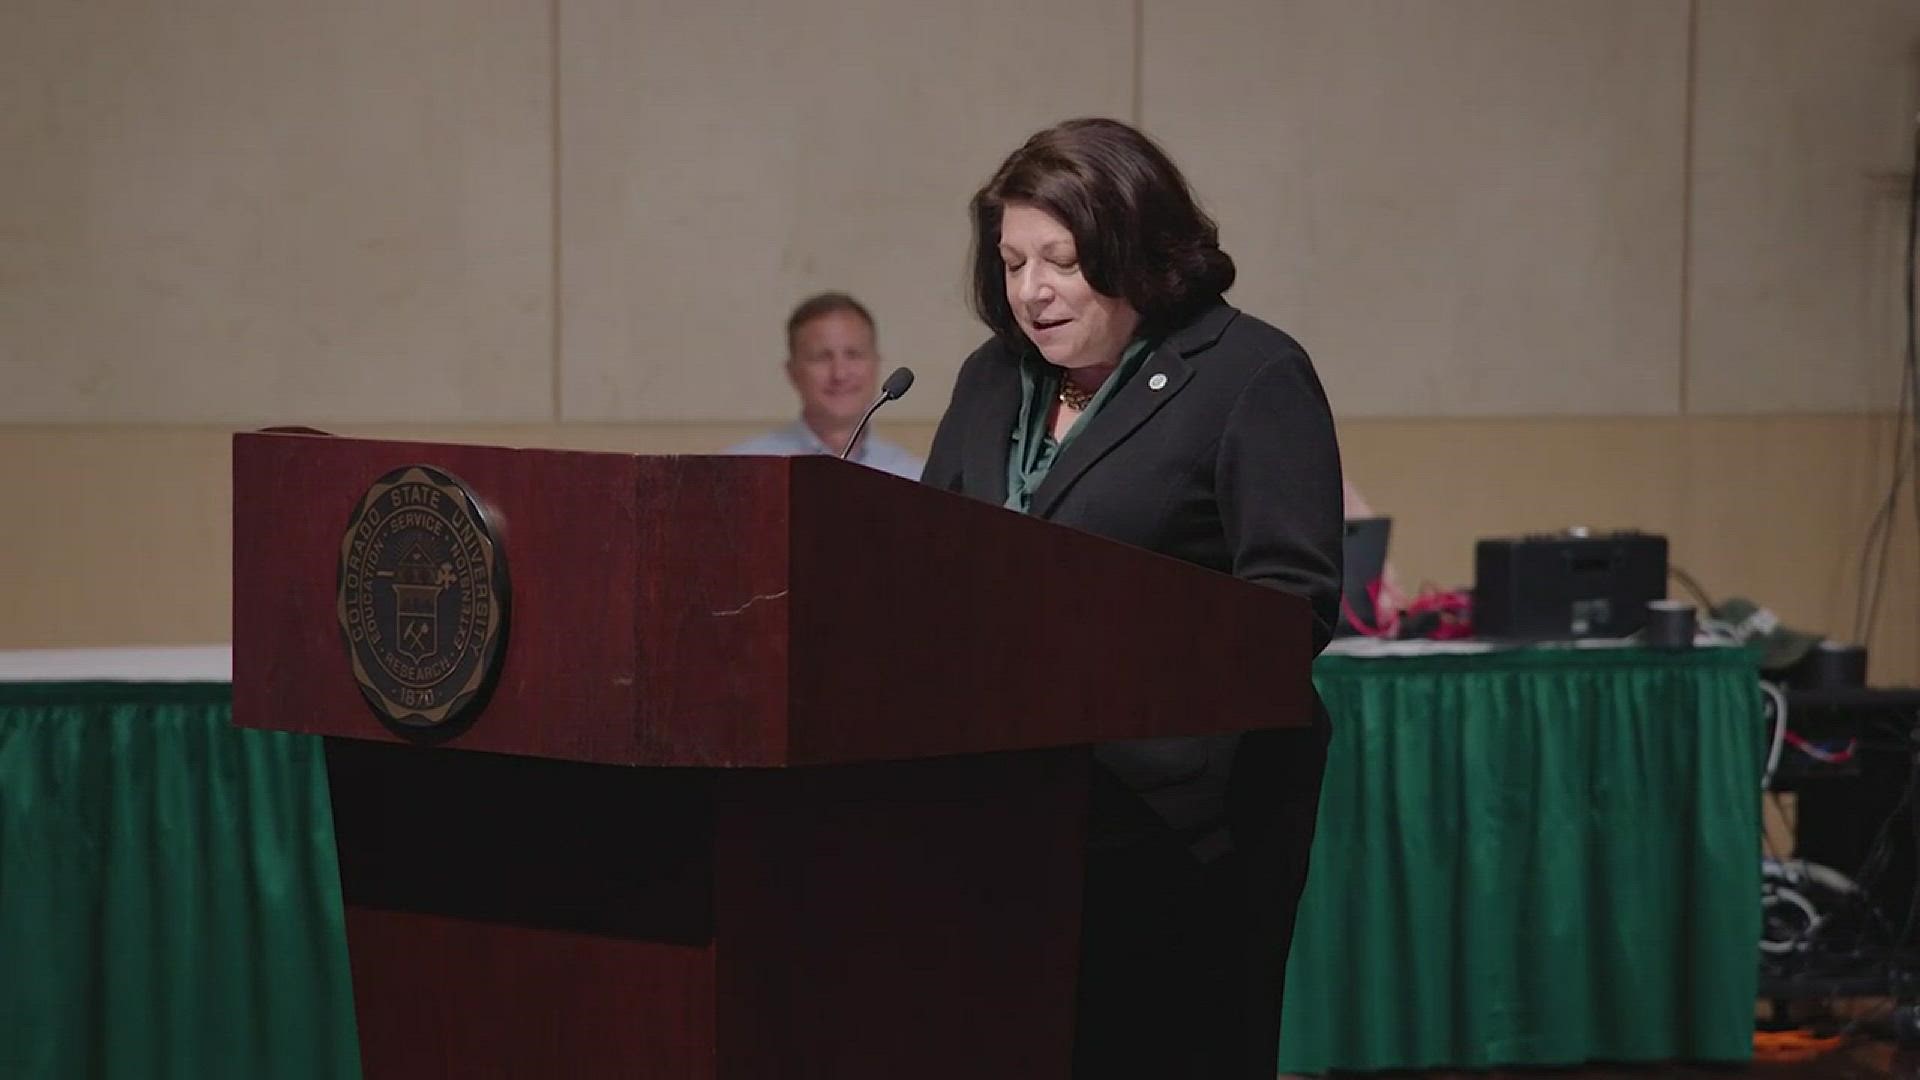 Joyce McConnell delivers an acceptance speech after the Colorado State University board of governors names her the first female present in the college's 150-year history.